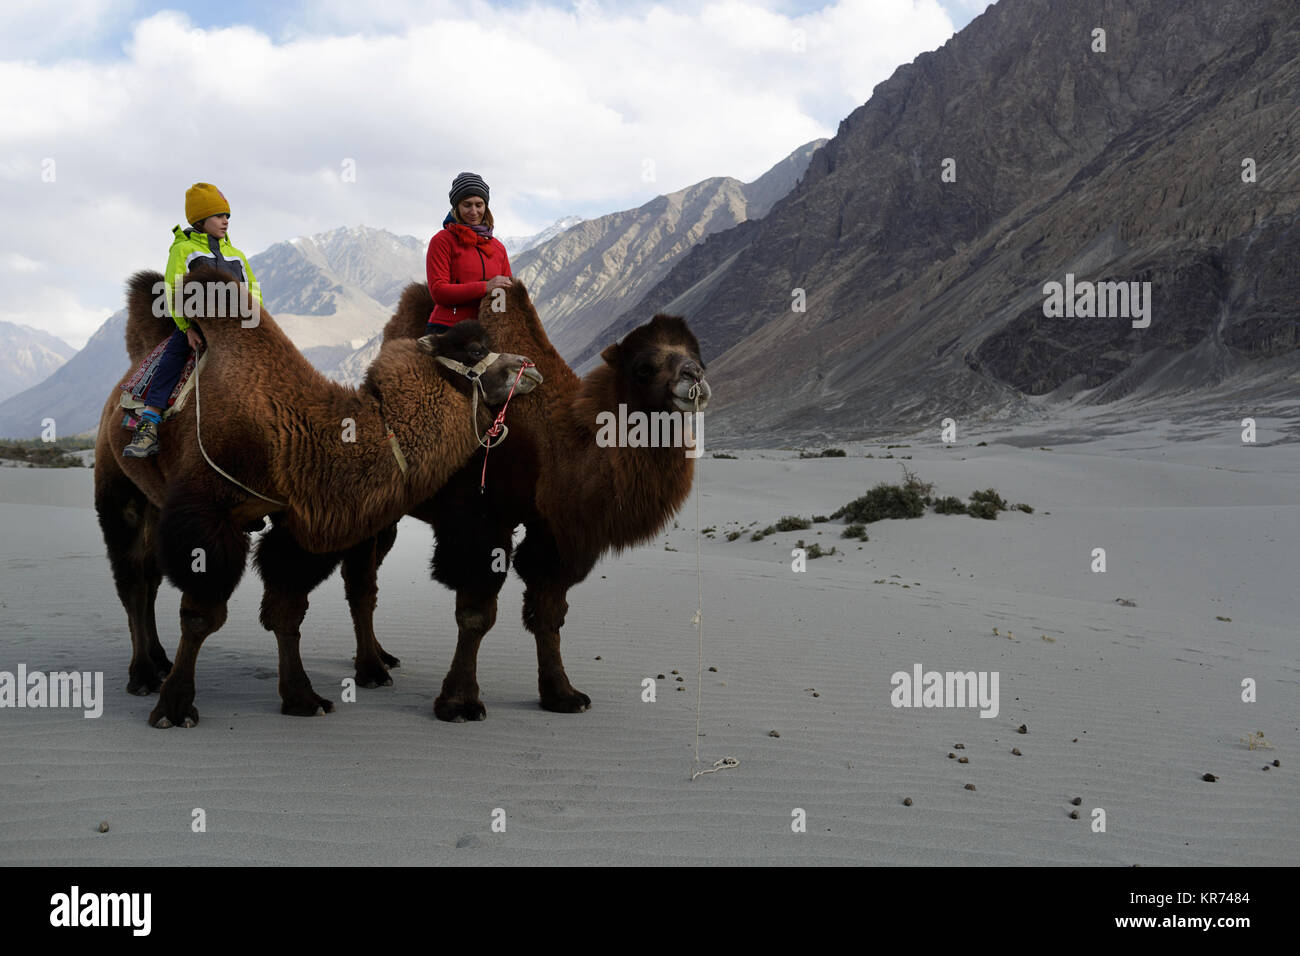 Mother and son riding double hump camels and crossing the desert in the Nubra valley, Ladakh, Jammu and Kashmir, India Stock Photo